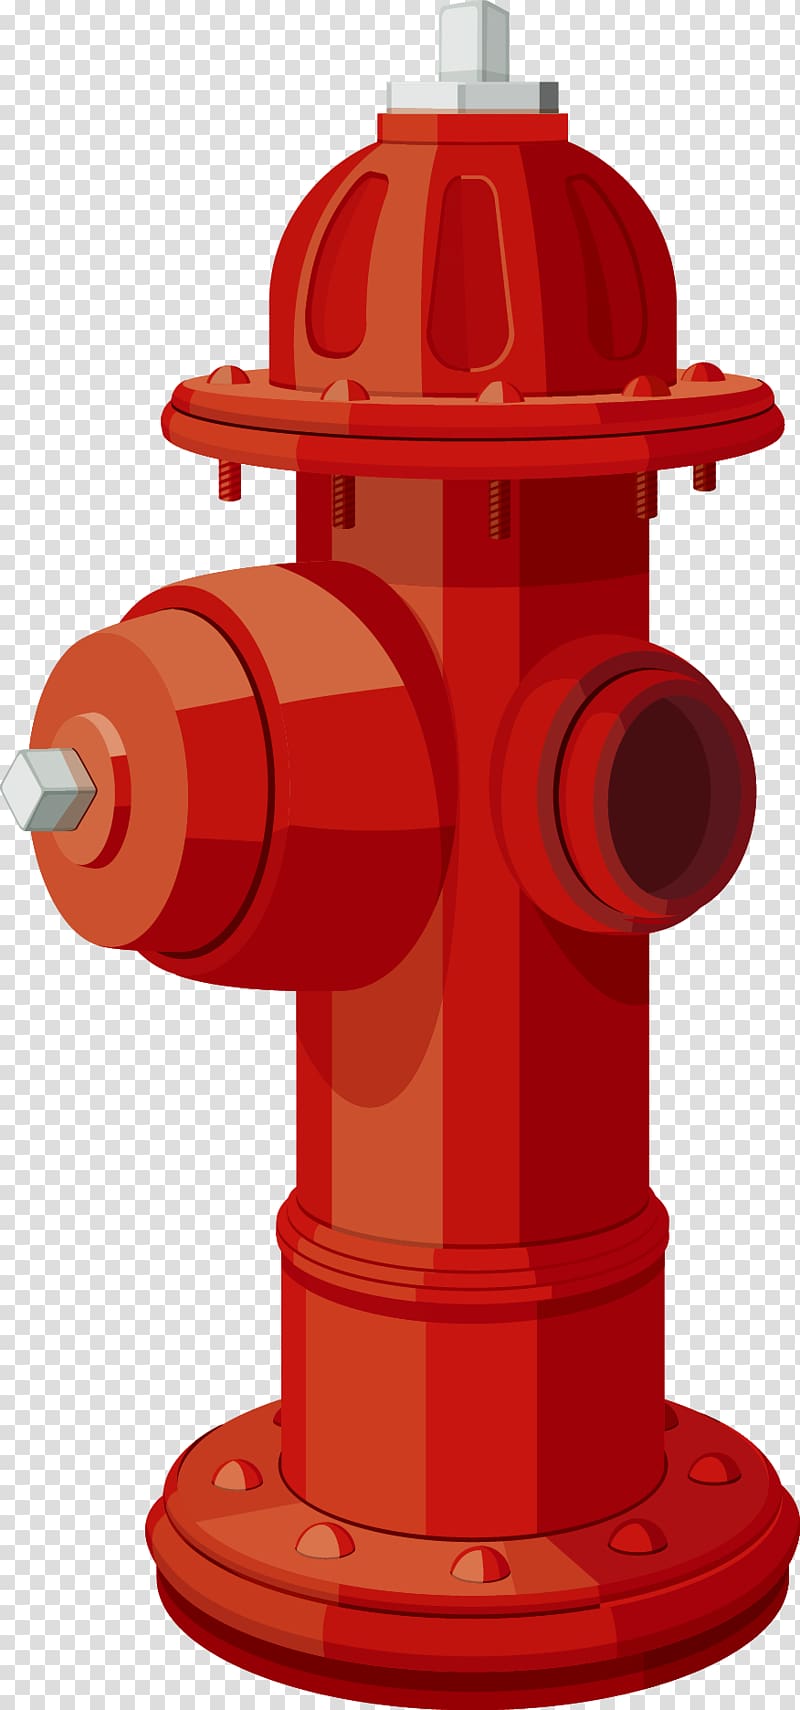 Fire hydrant Firefighting Firefighter, Cartoon fire hydrant transparent background PNG clipart